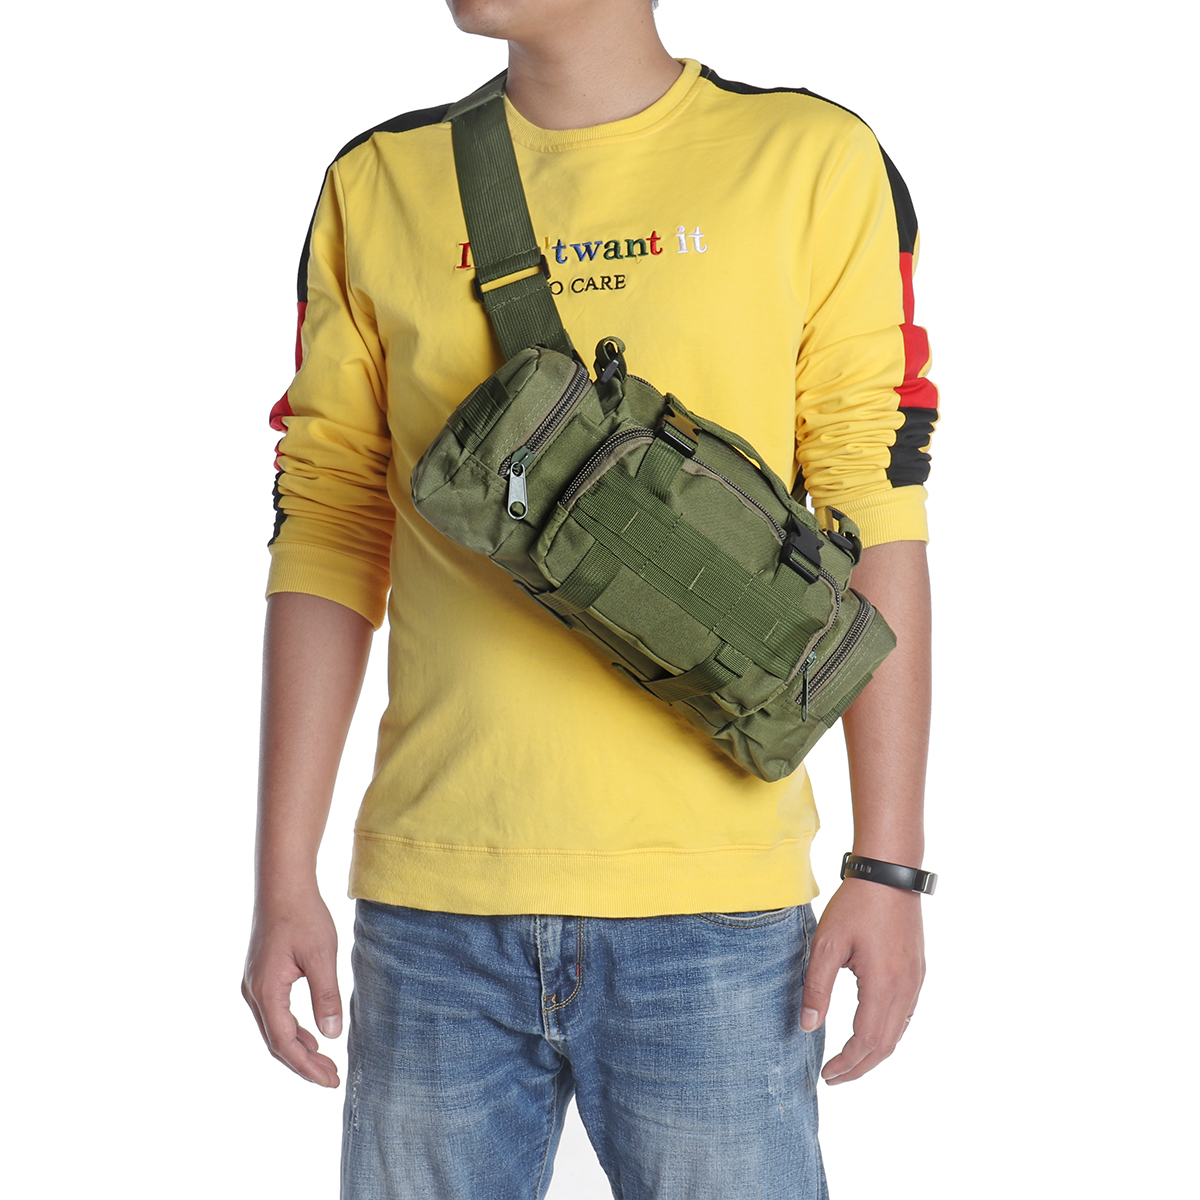 Multifunctional-Outdoor-Sports-Hiking-with-Zippers-Nylon-Oxford-Cloth-Tactical-Shoulder-Bag-Waist-Pa-1825563-27